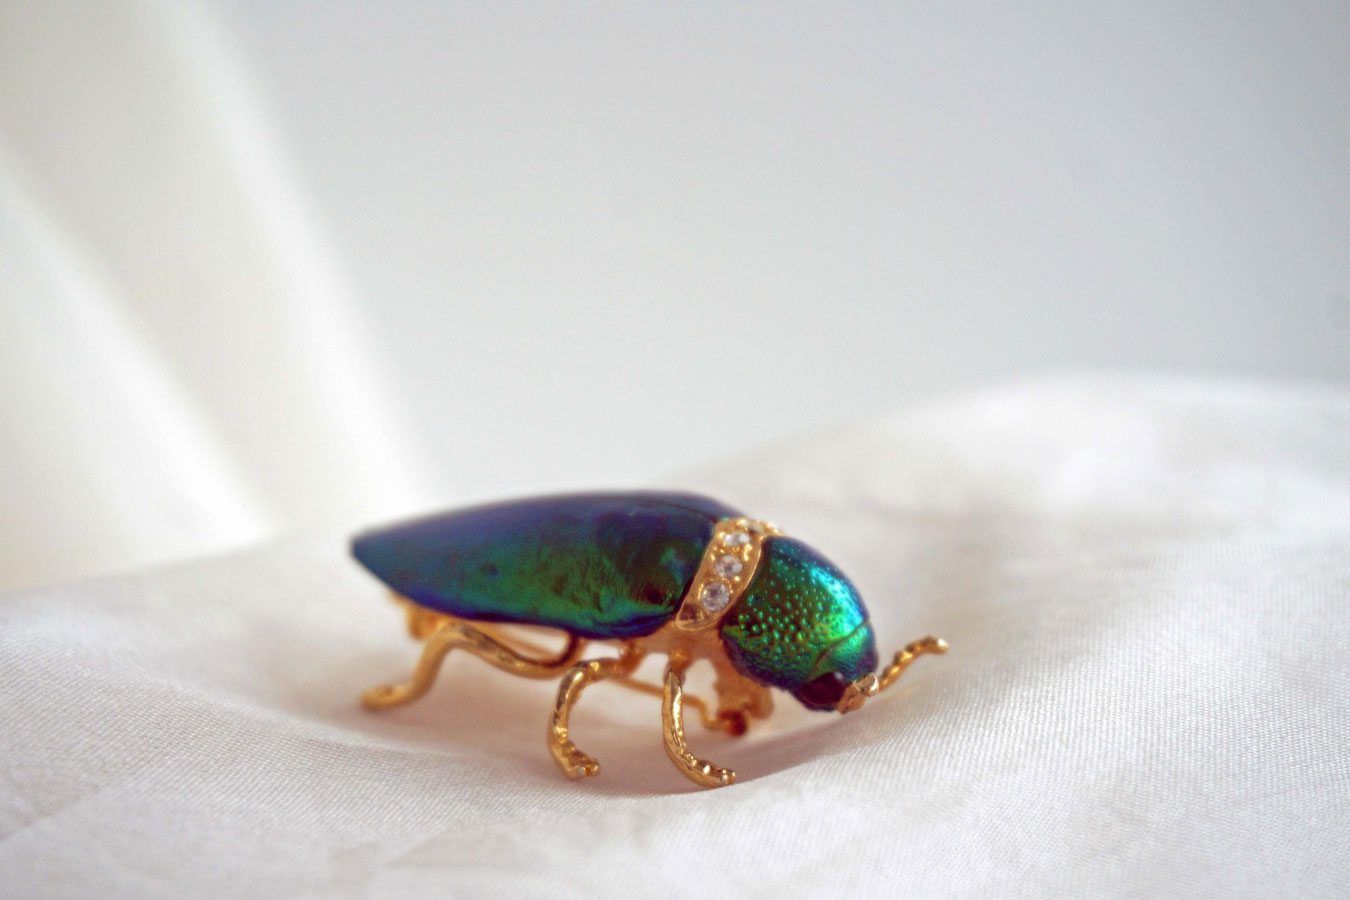 Vintage Iridescent Green Scarab Beetle Brooch, Green Beetle Pin Brooch Gift For Her - Ada's Attic Vintage- 3